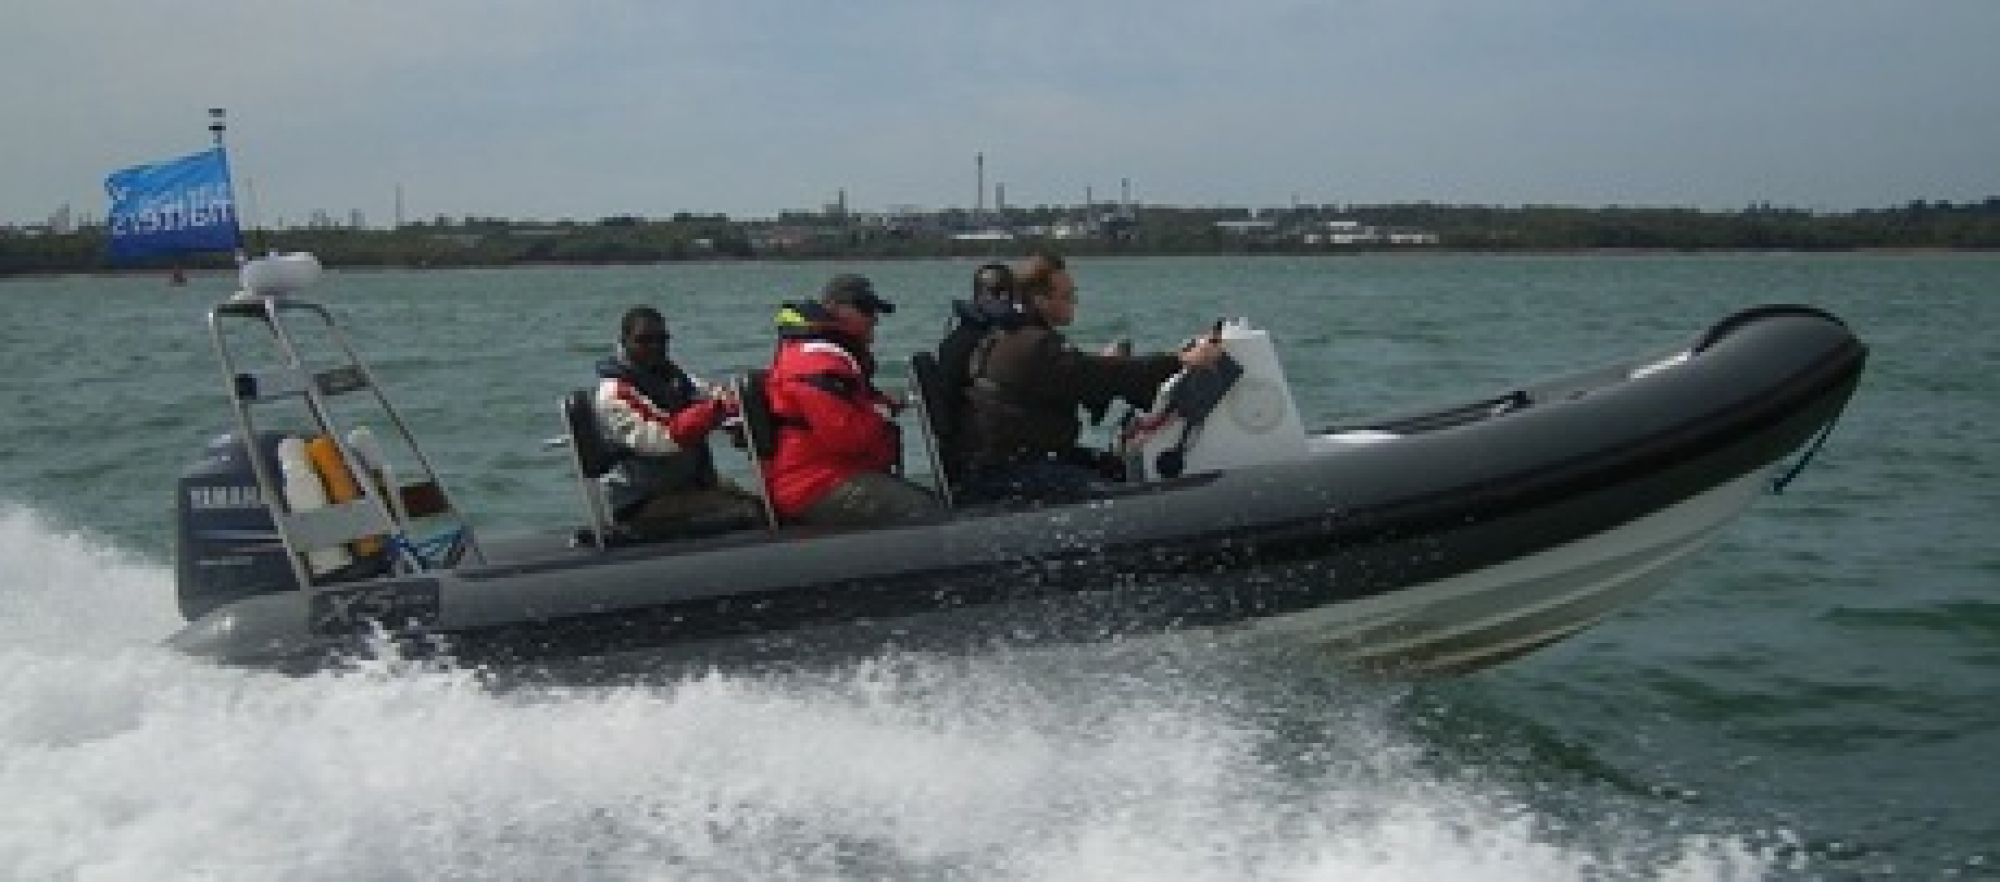 powerboat level 2 course